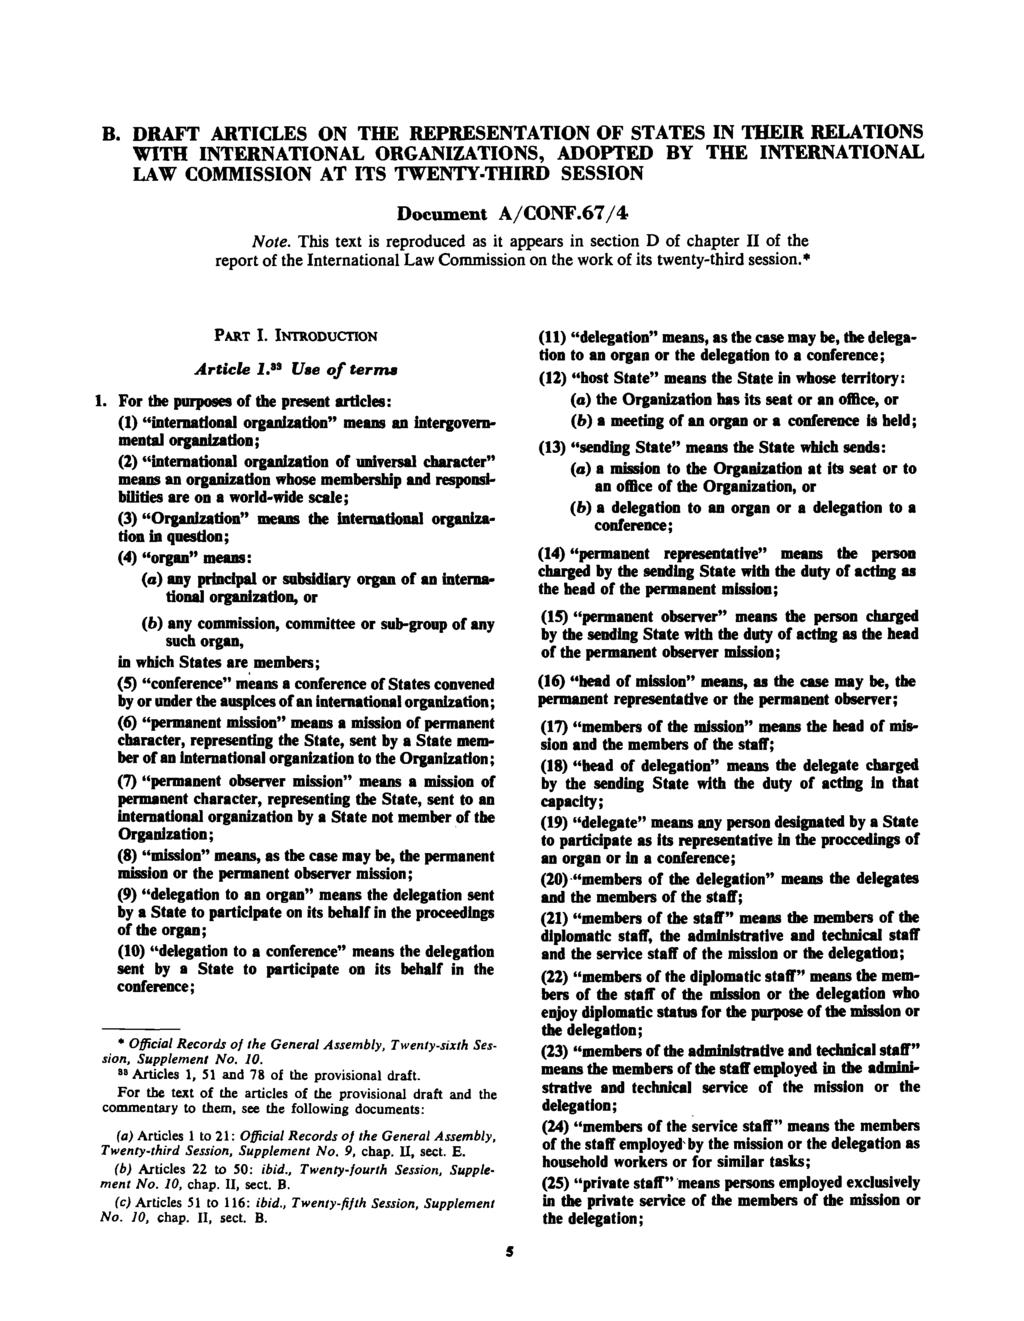 B. DRAFT ARTICLES ON THE REPRESENTATION OF STATES IN THEIR RELATIONS WITH INTERNATIONAL ORGANIZATIONS, ADOPTED BY THE INTERNATIONAL LAW COMMISSION AT ITS TWENTY-THIRD SESSION Document A/CONF.